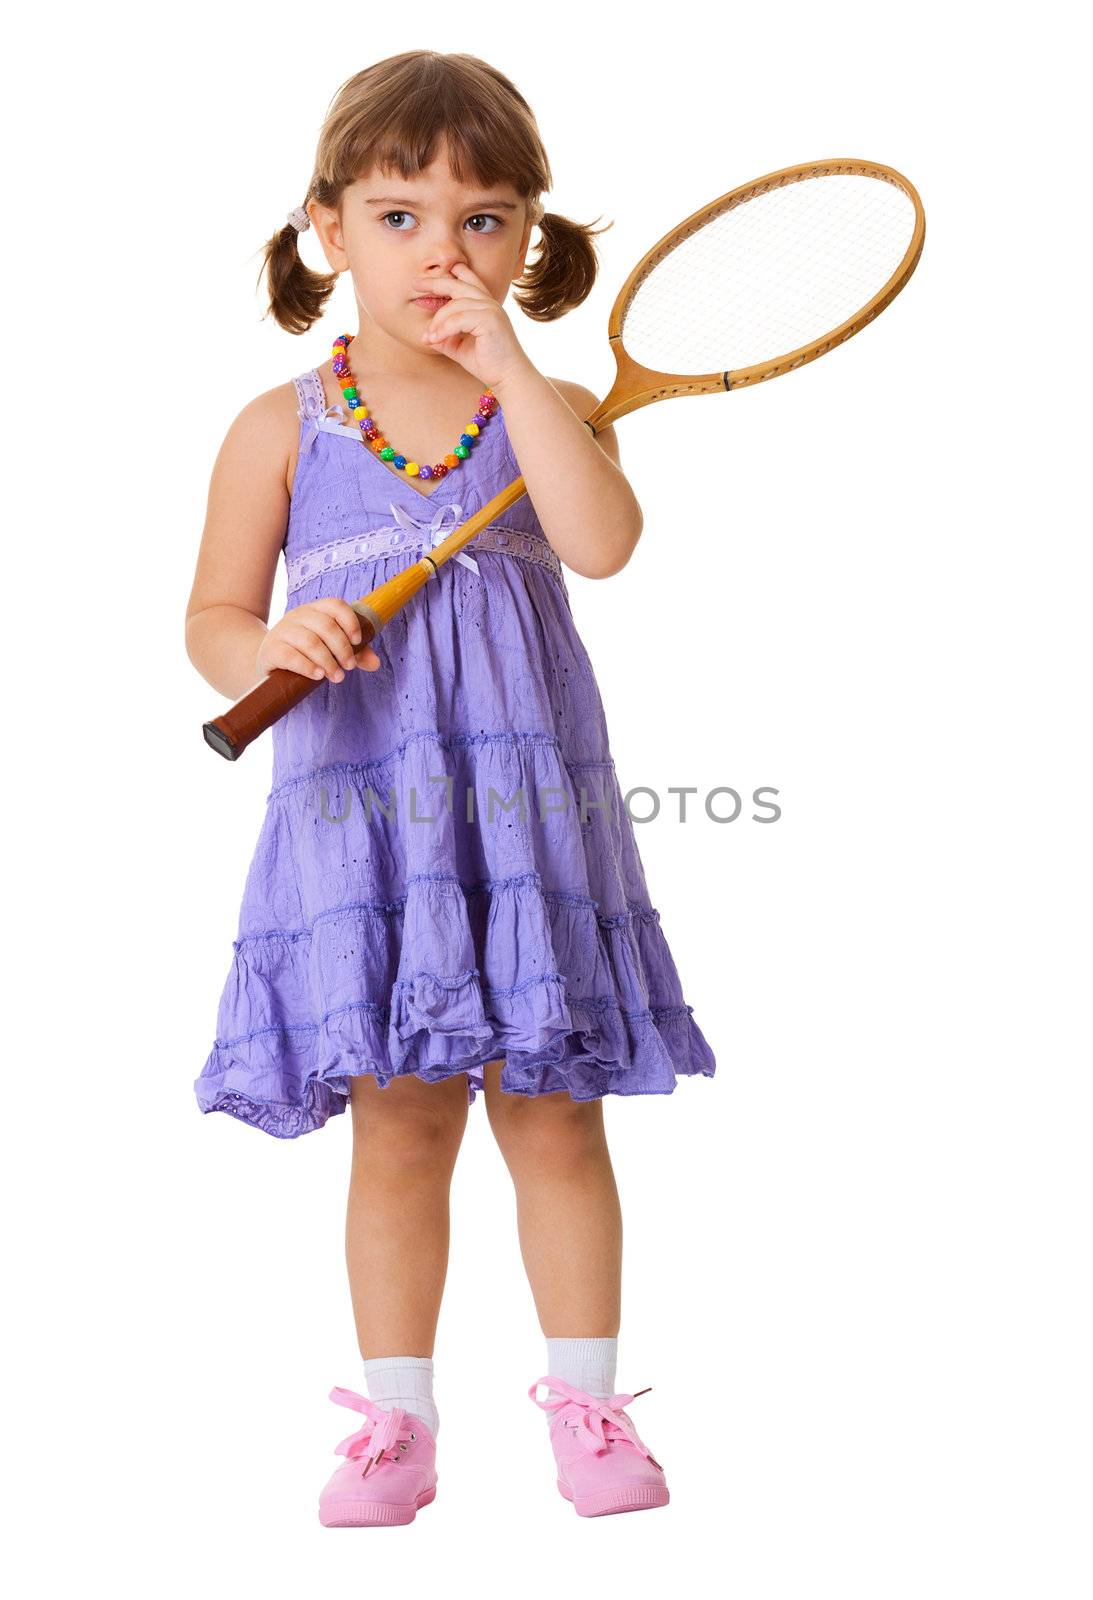 Funny girl picks his nose, instead of playing badminton isolated on white background